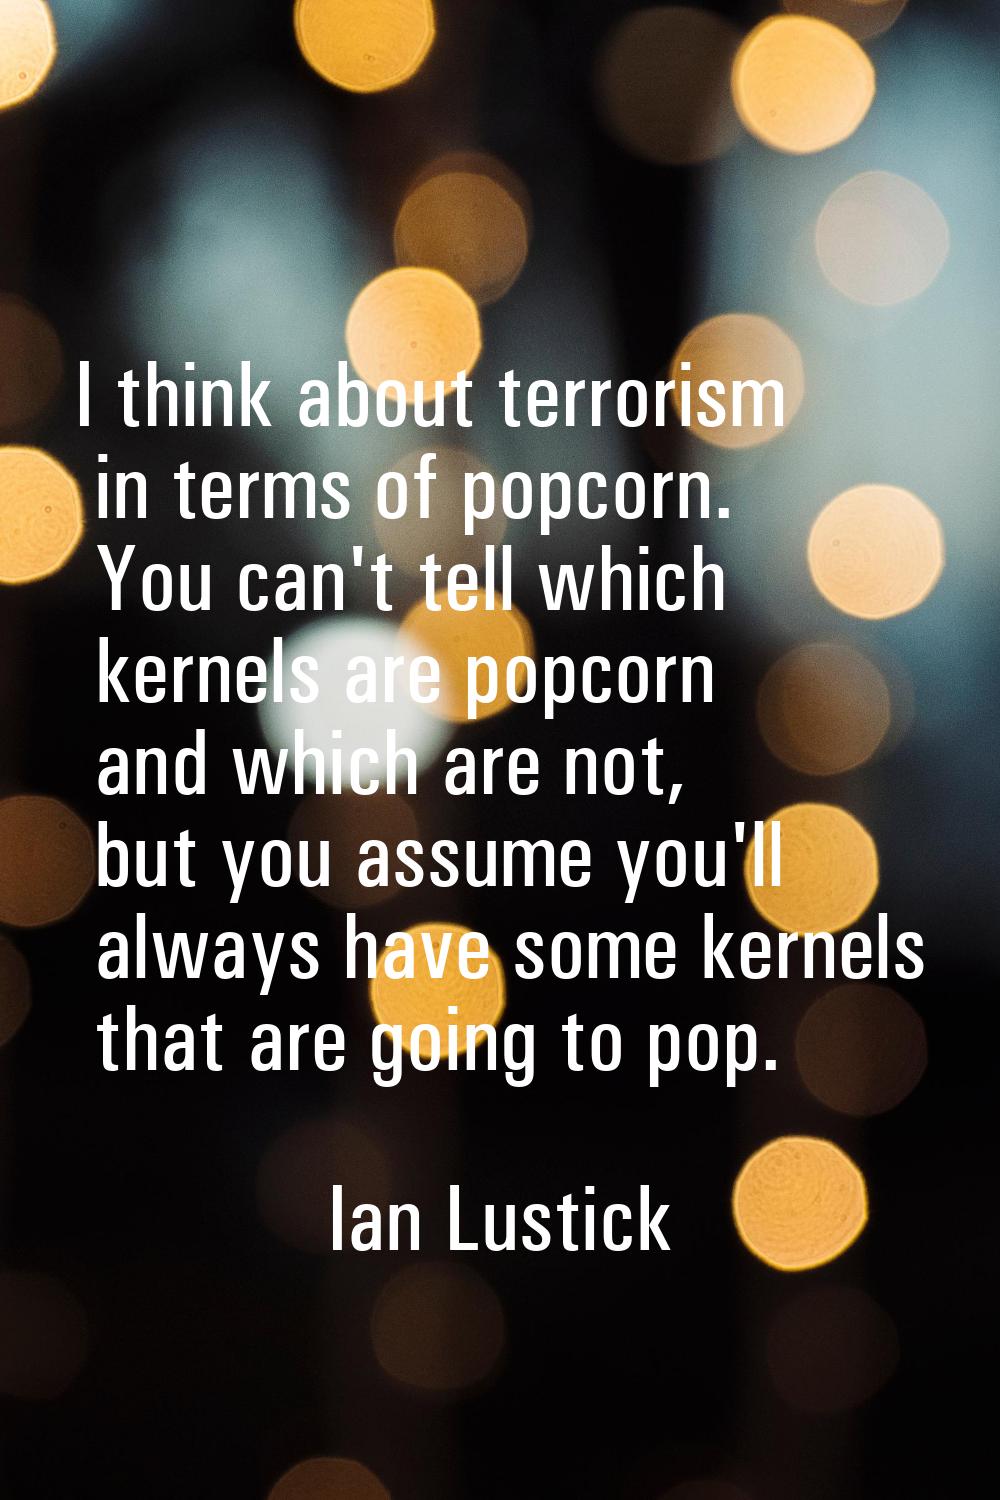 I think about terrorism in terms of popcorn. You can't tell which kernels are popcorn and which are